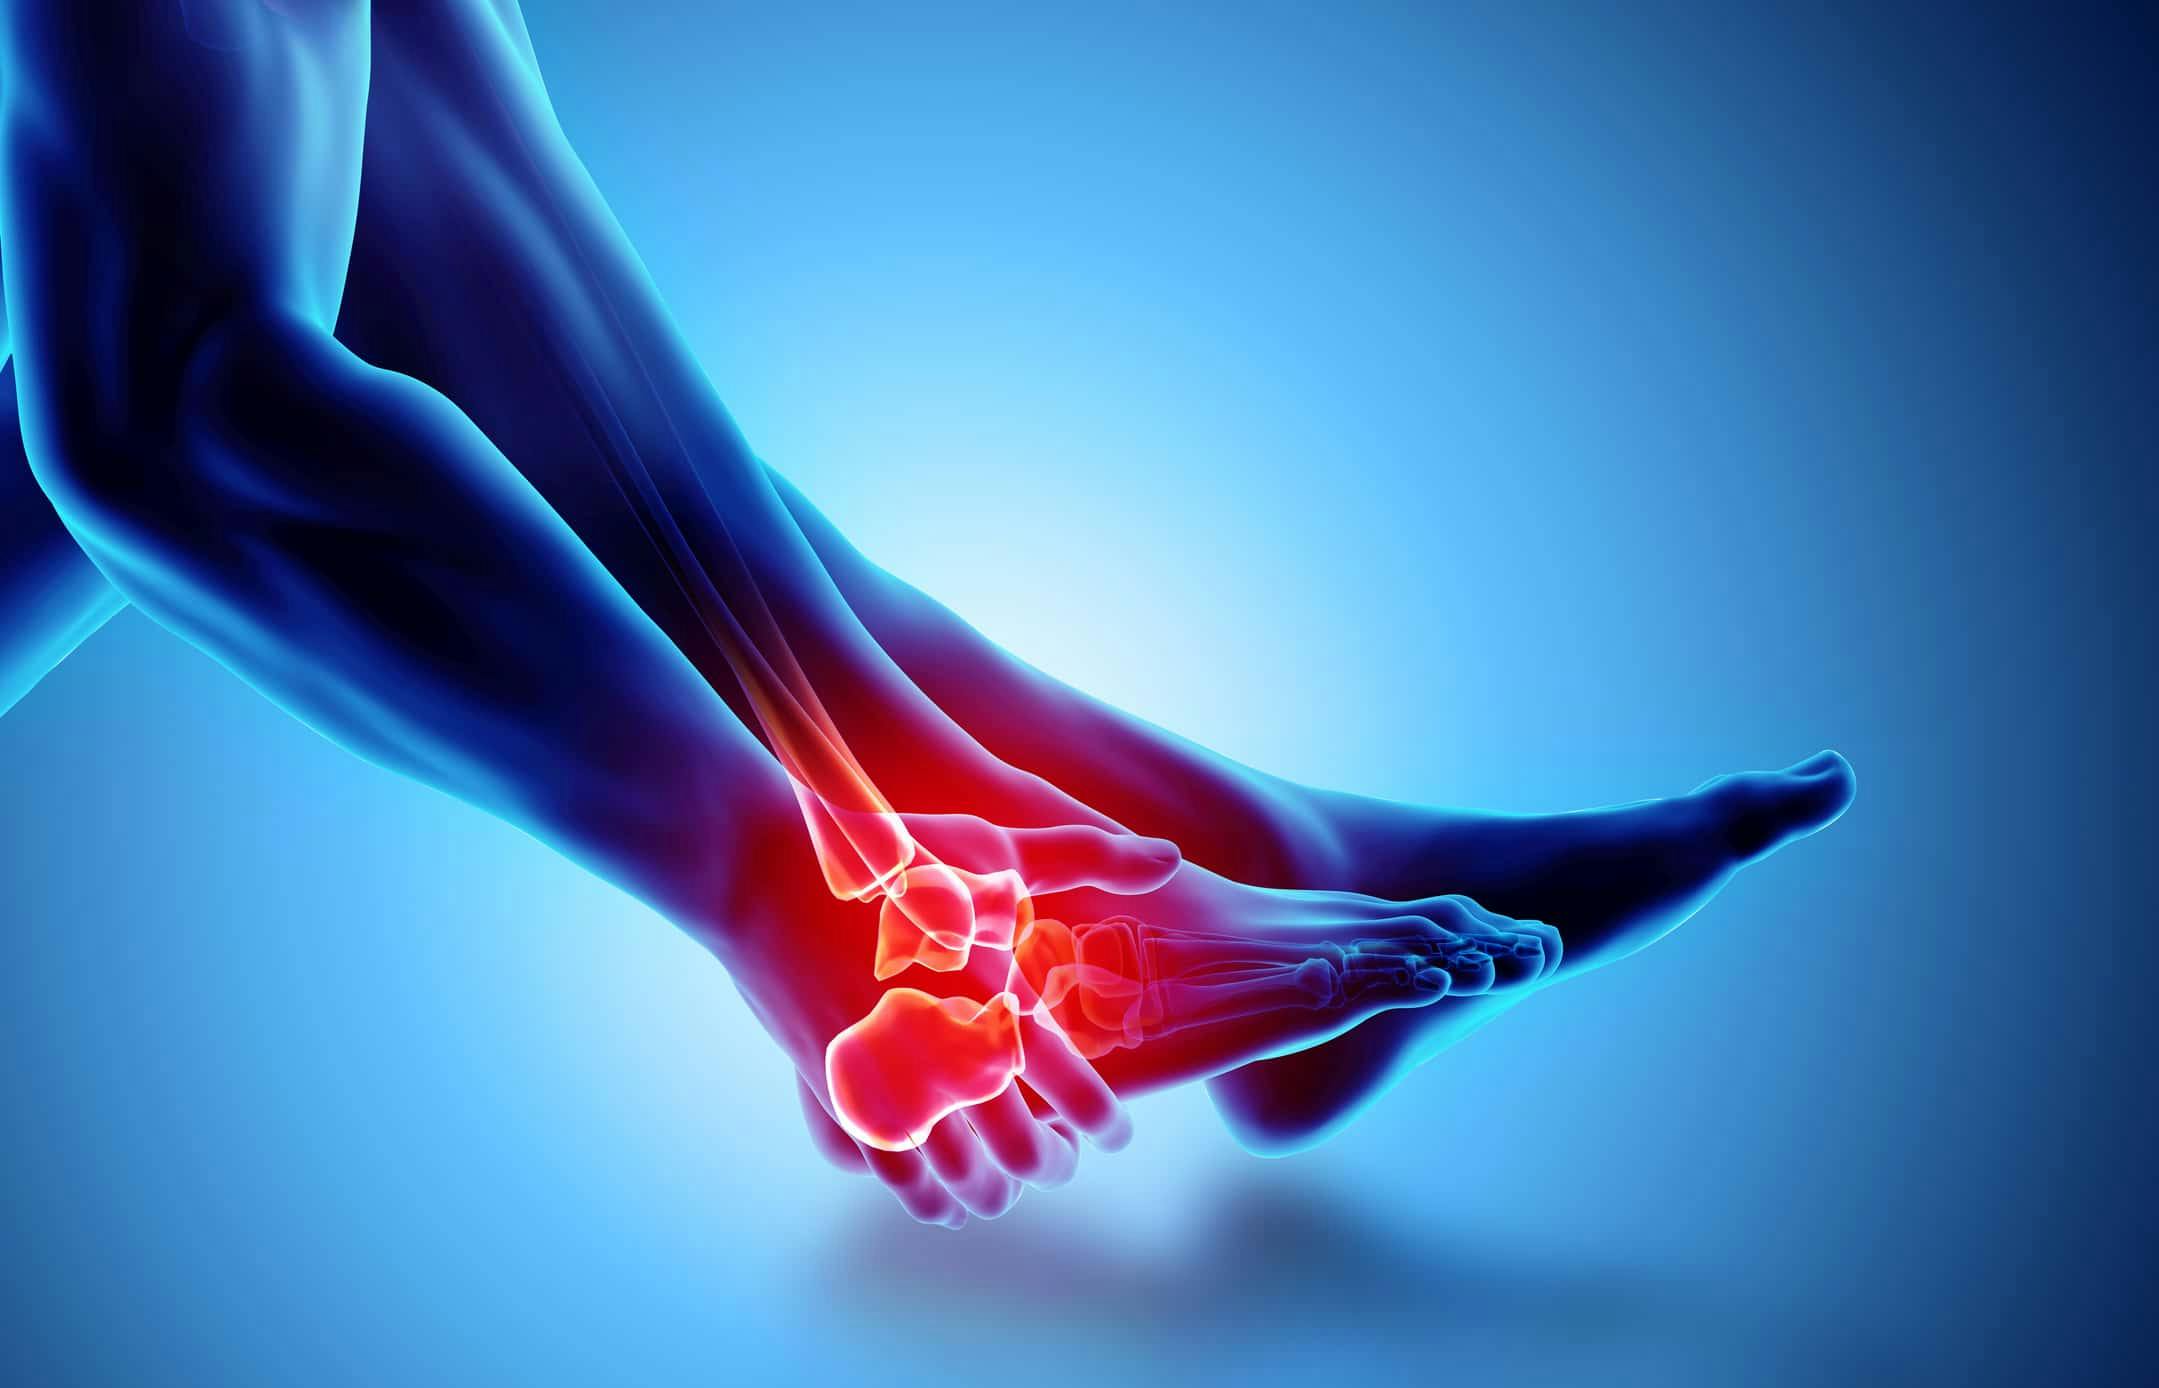 5 Ways Employees Can Prevent Further Nerve Damage After An Ankle Sprain